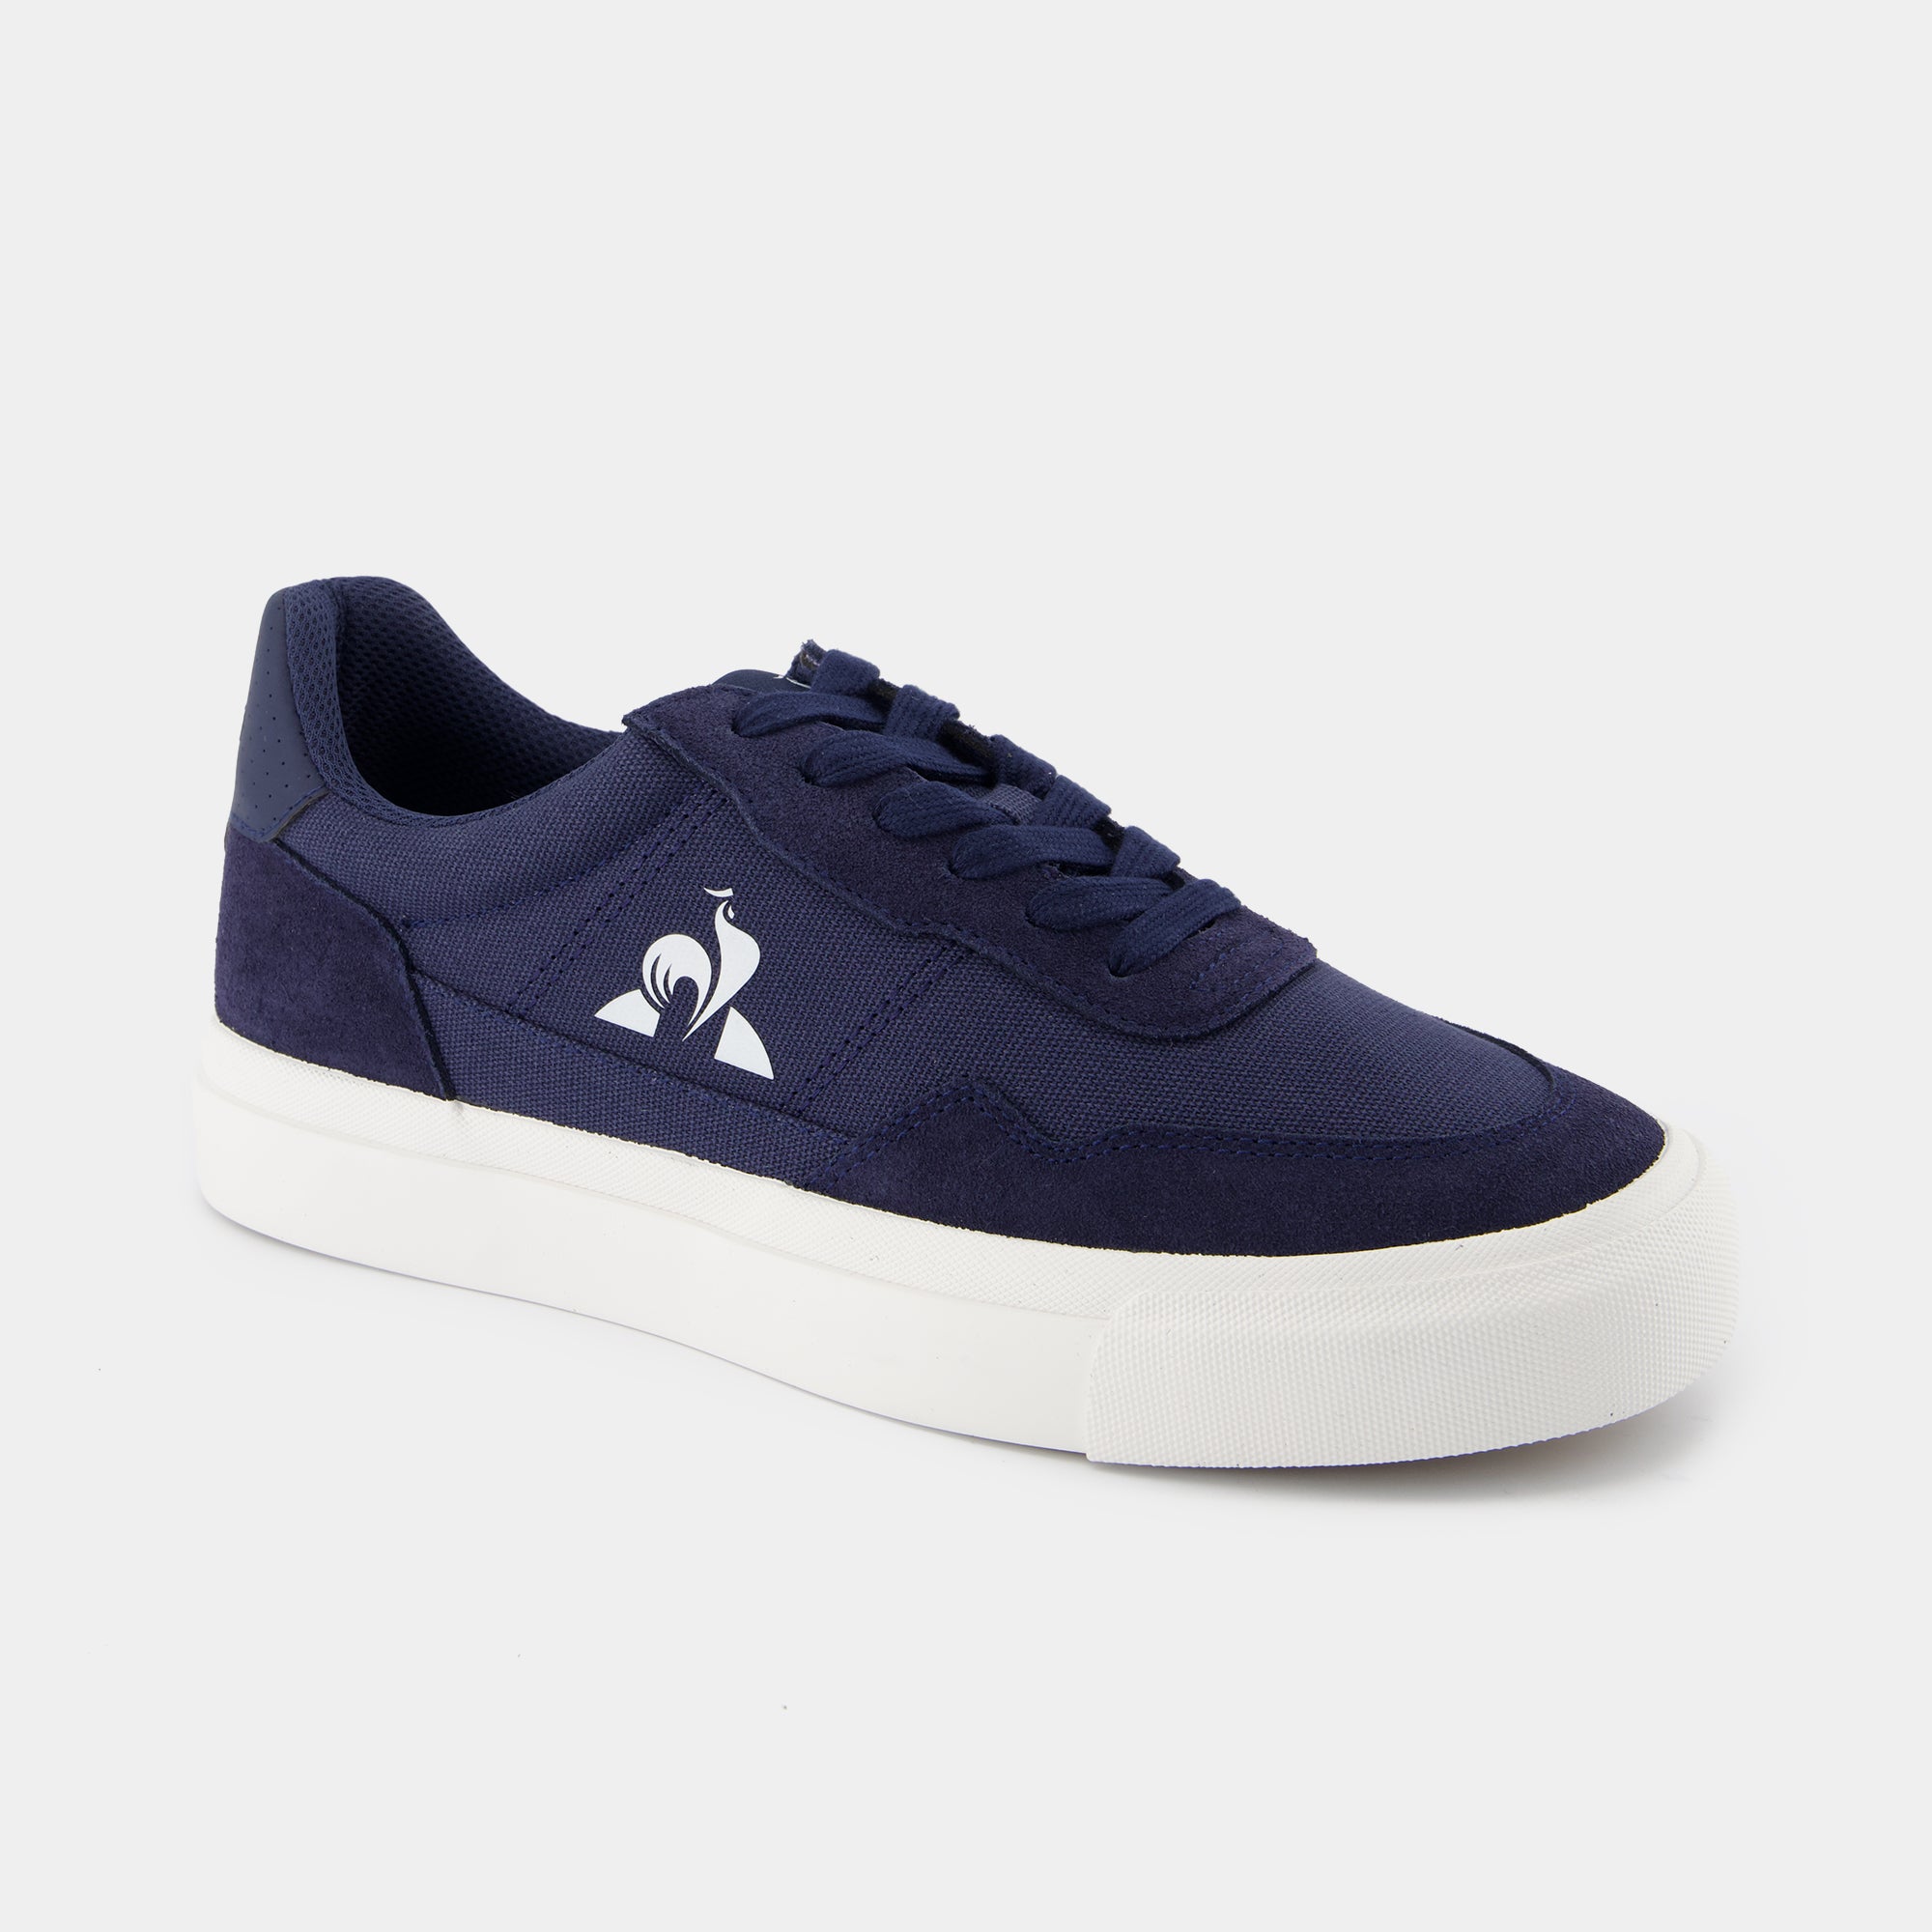 2422896-LCS OLLIE dress blue/optical white  | Shoes LCS OLLIE Unisex